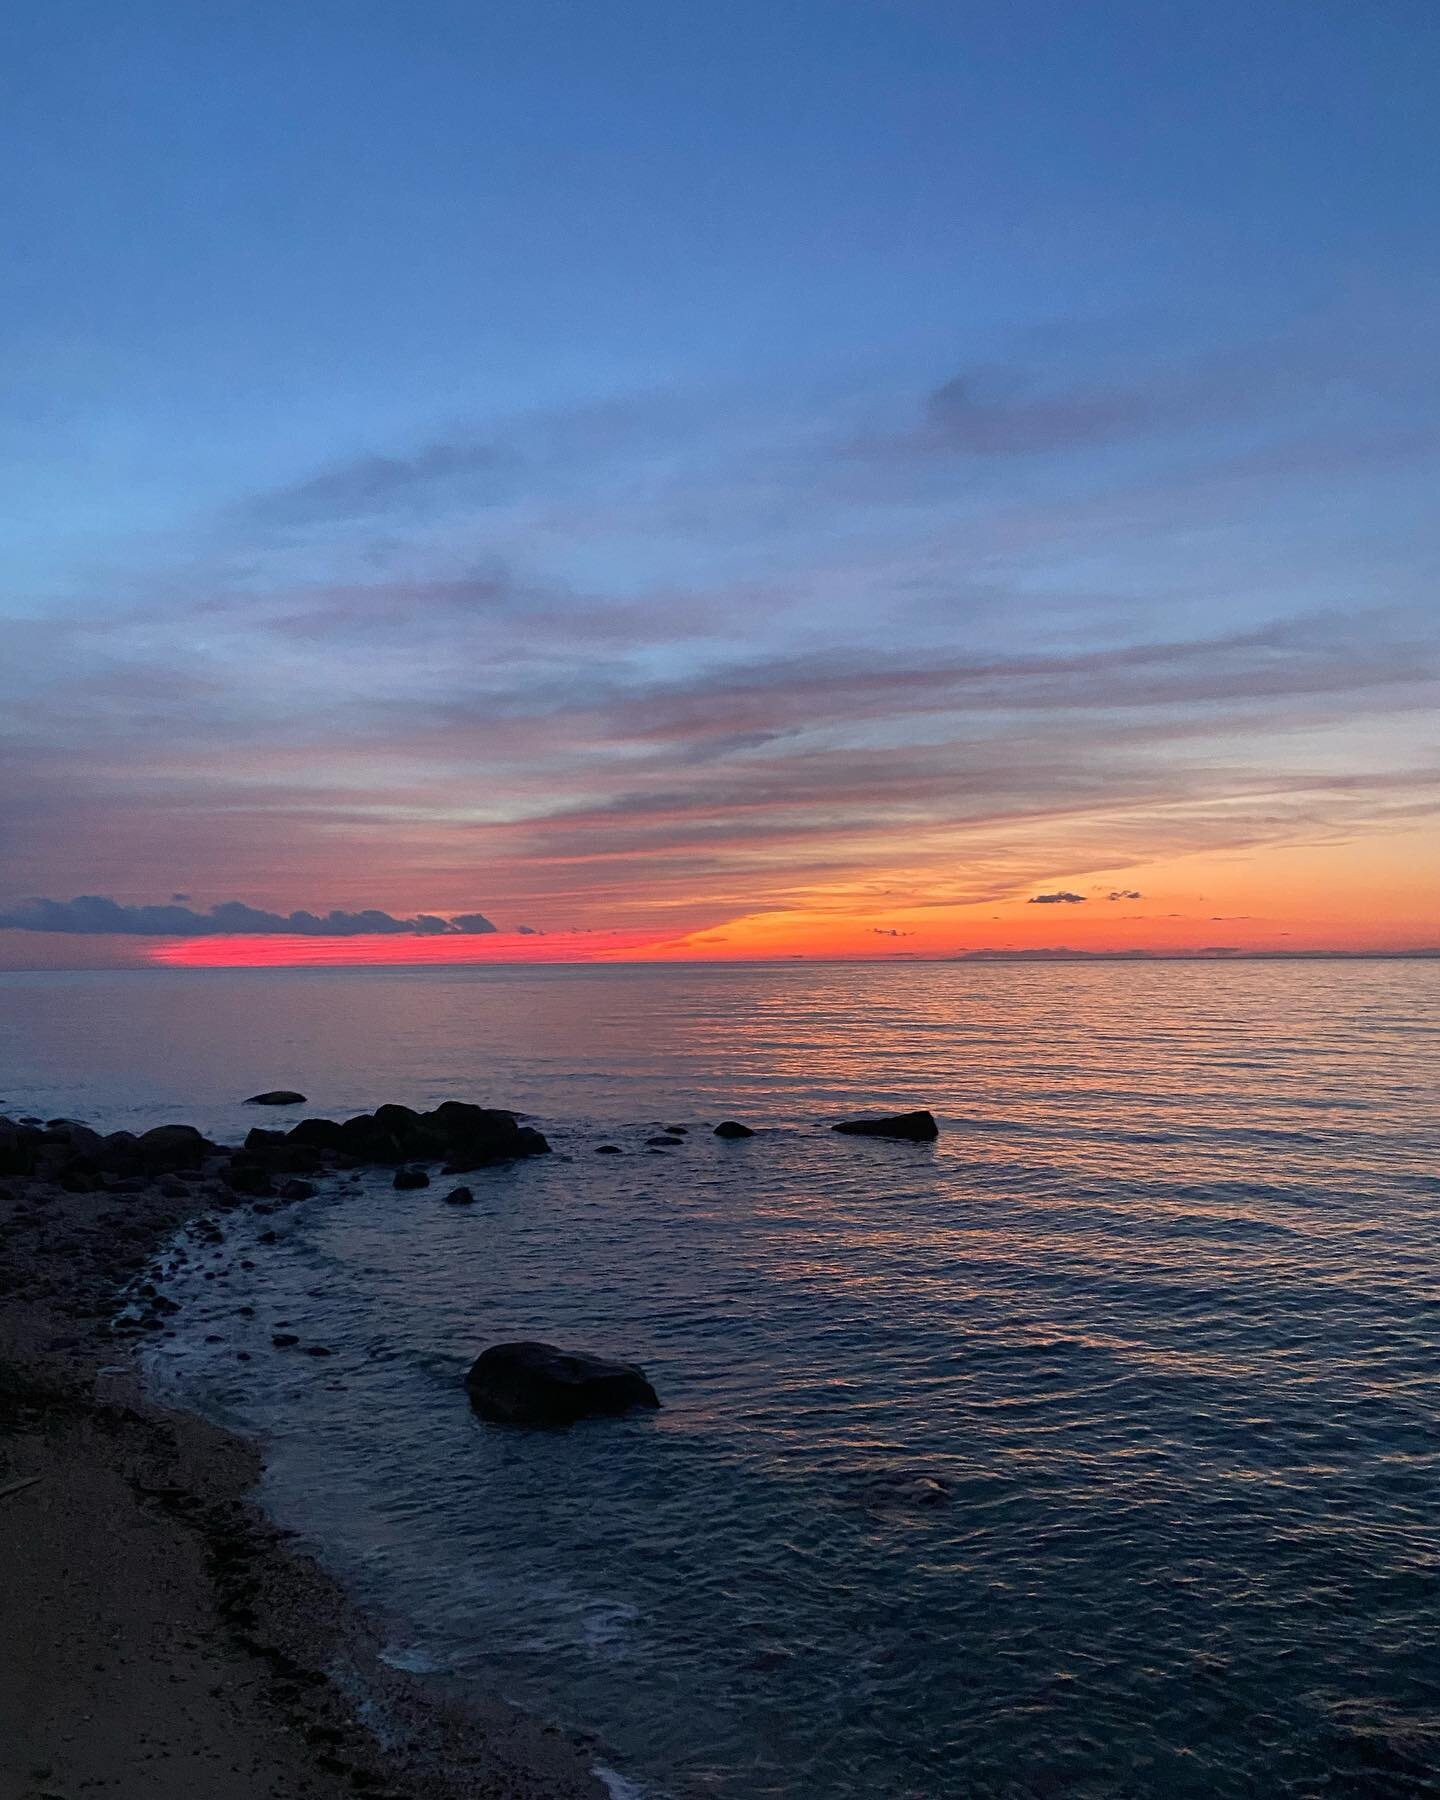 You could have 5 different sunsets in one night at @halyardgreenport @soundviewgreenport , each more magical than the next. 🙏

Weekend plans: 
🌅 Sunset dinner Friday - Sunday 5-8pm. Make a reservation in our bio. 

🍽️ lunch from 12-3pm on Saturday